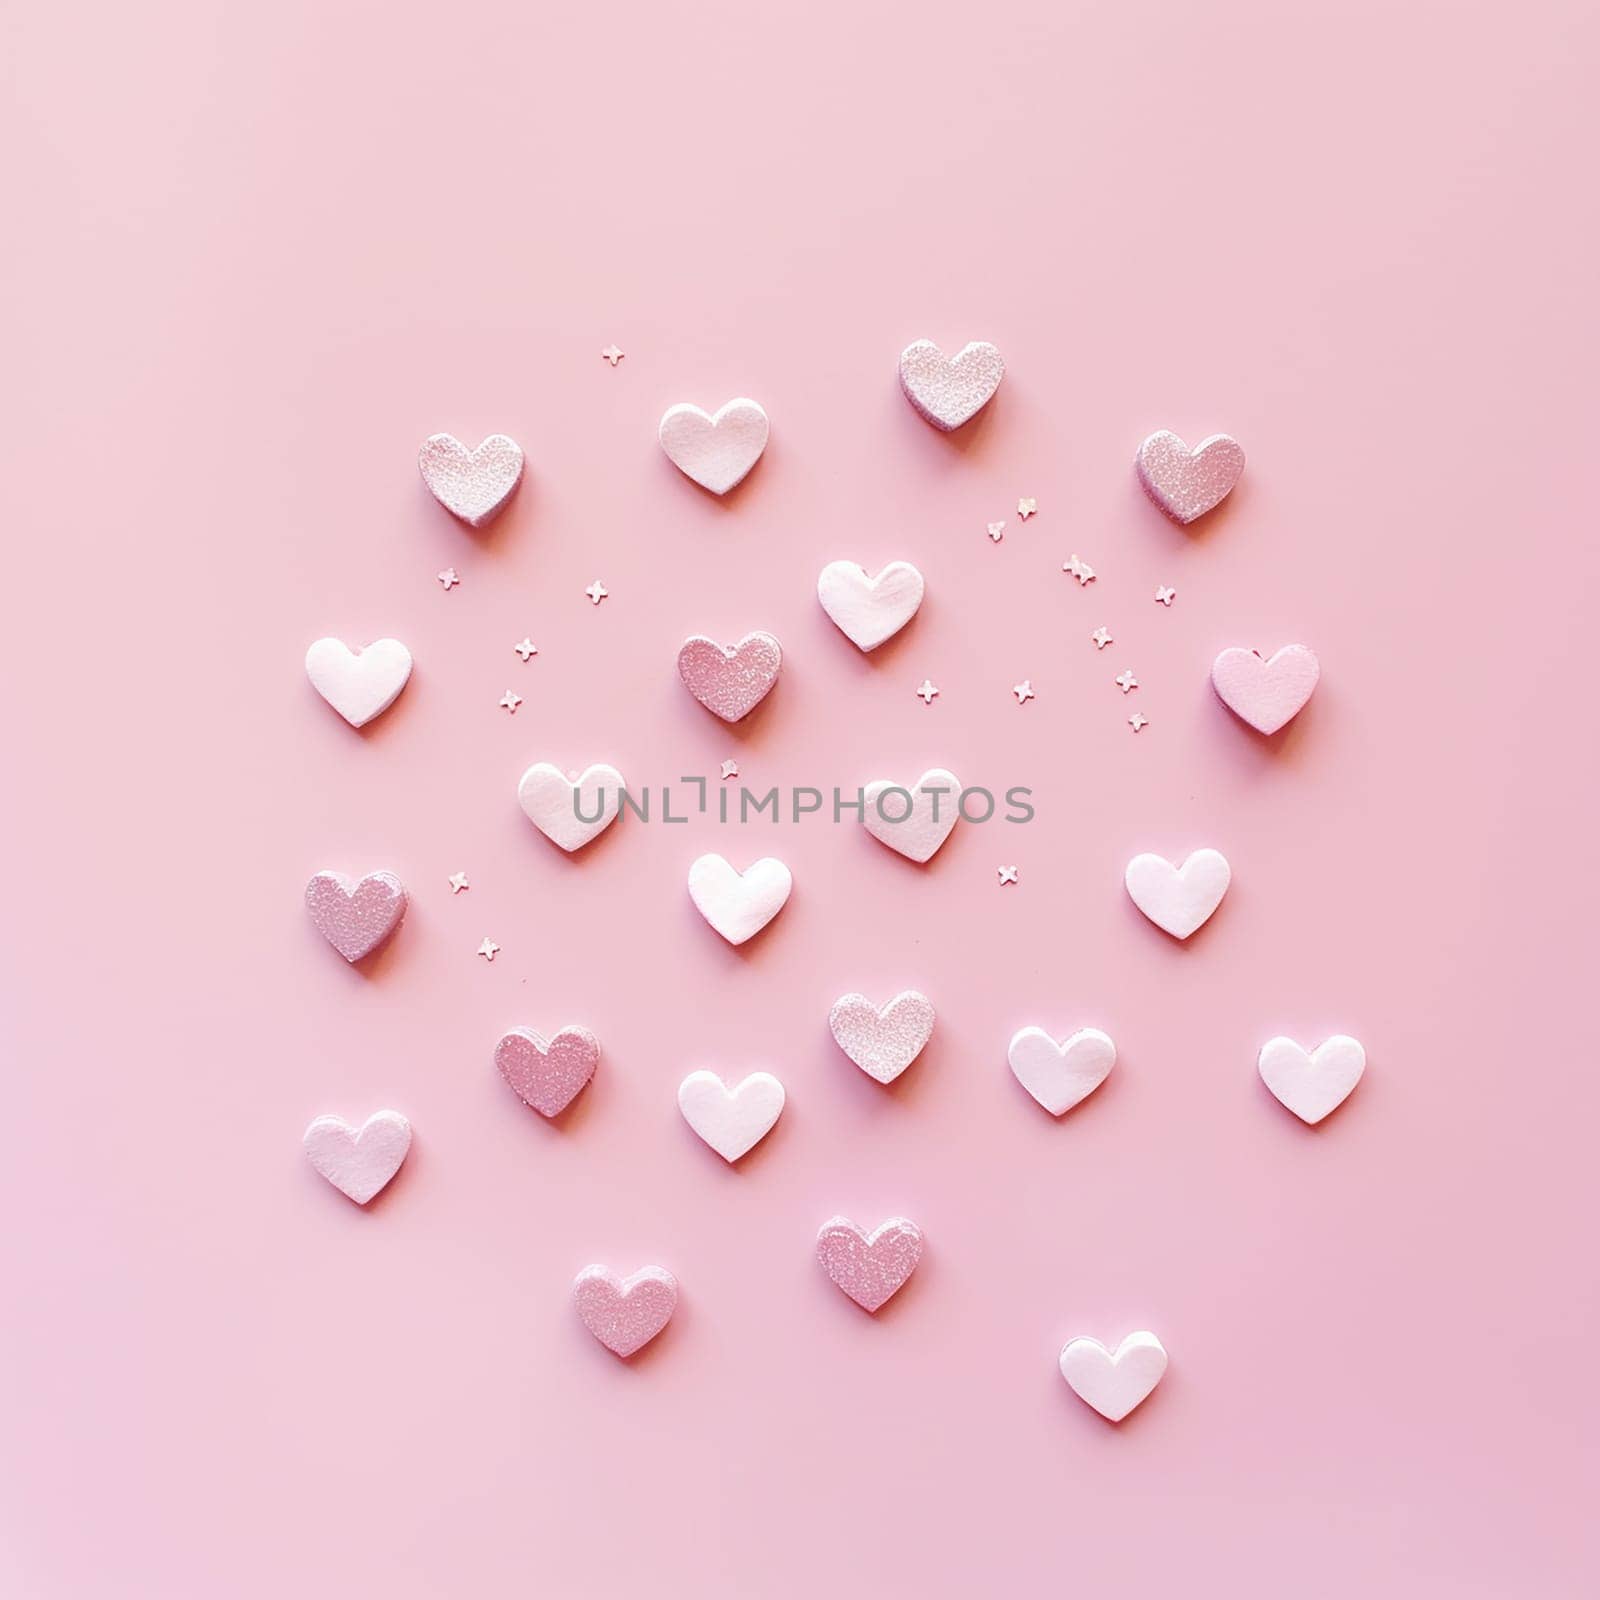 Assorted heart shapes on pink background, representing love, affection, or Valentine's Day.